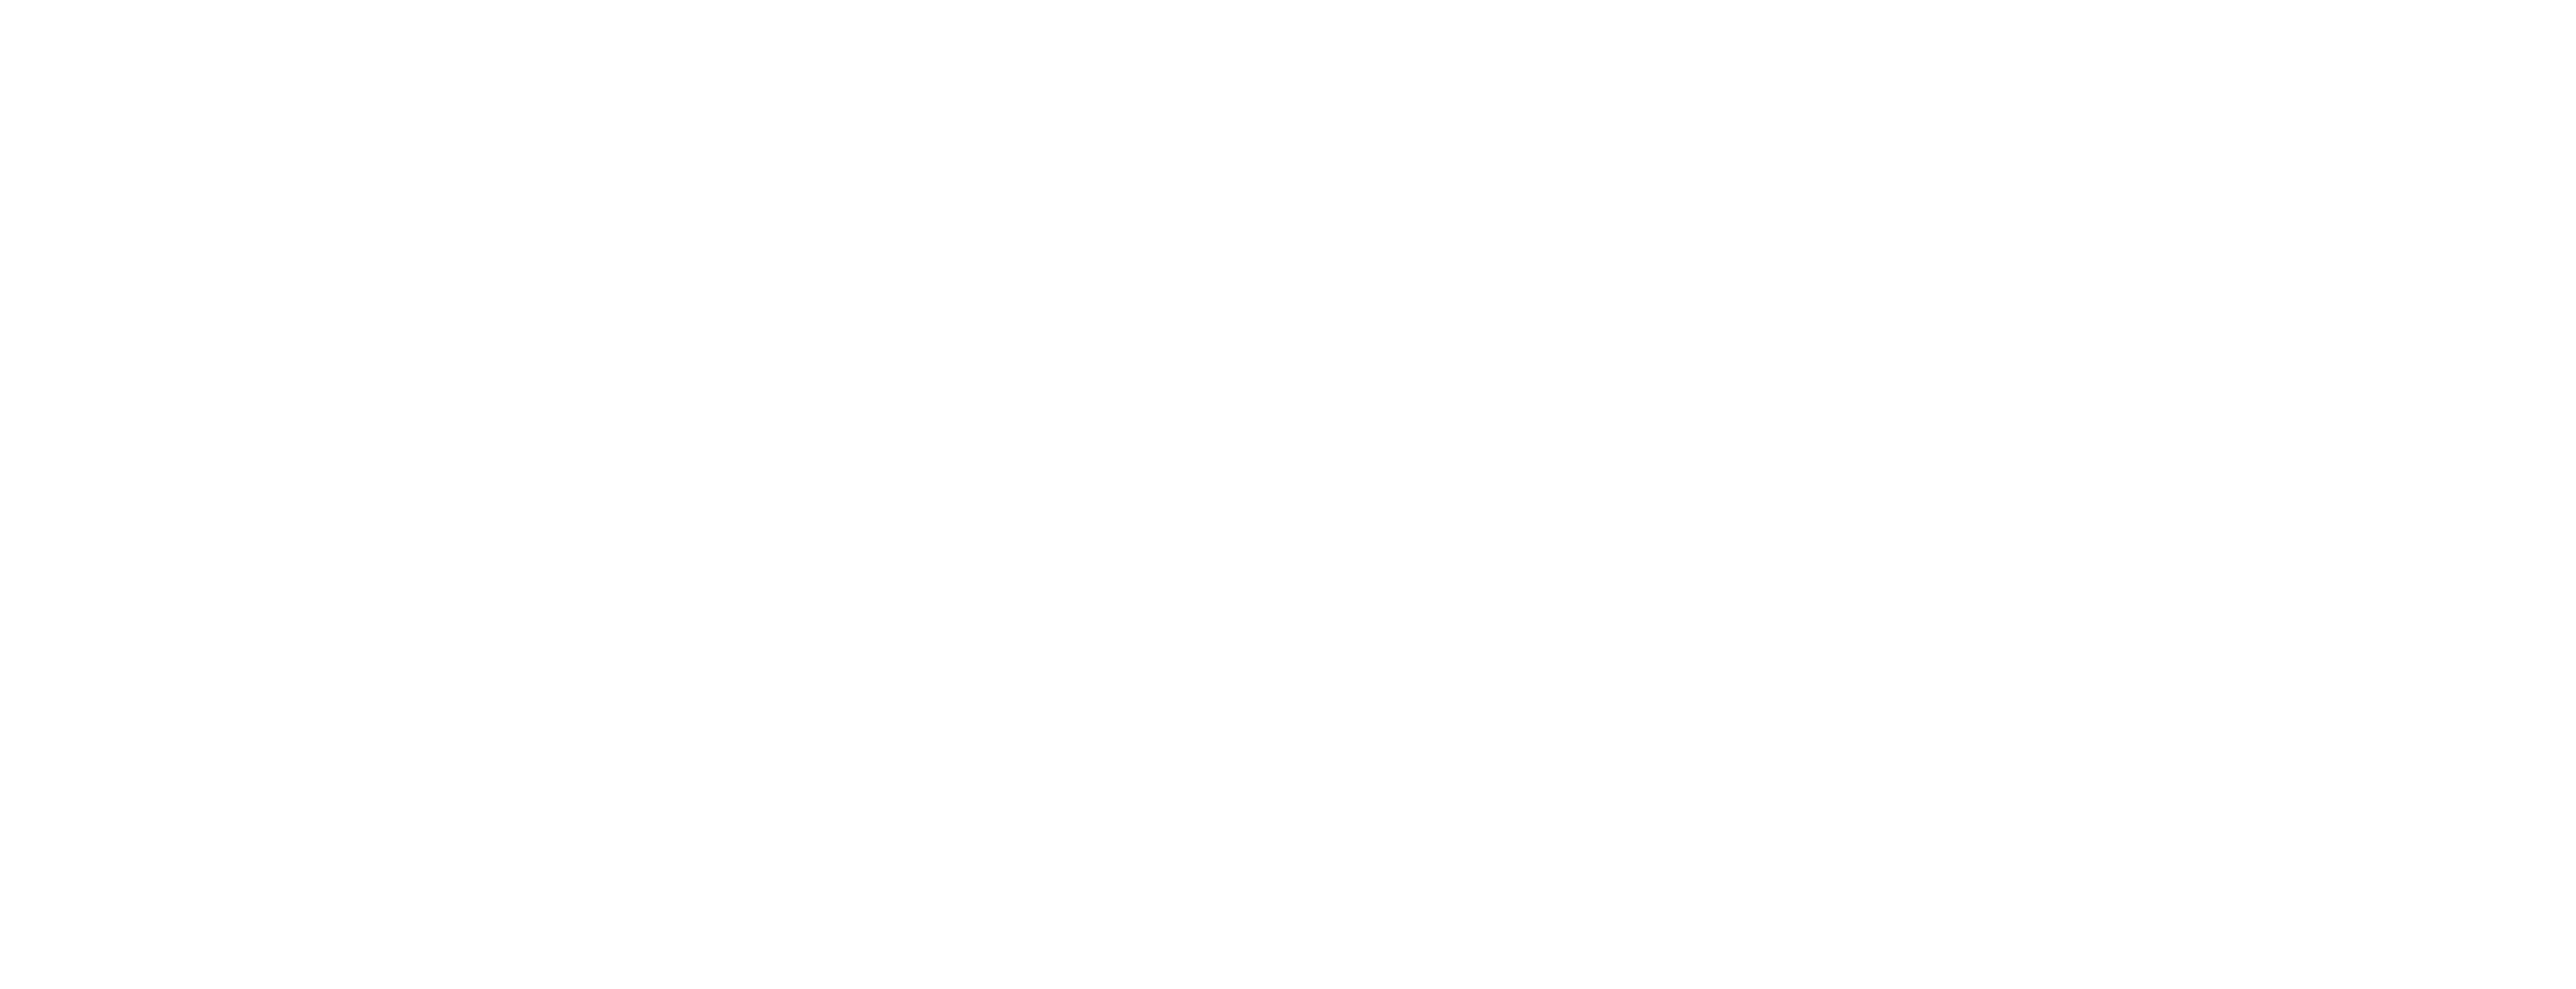 Welcome to Pro Sky Video